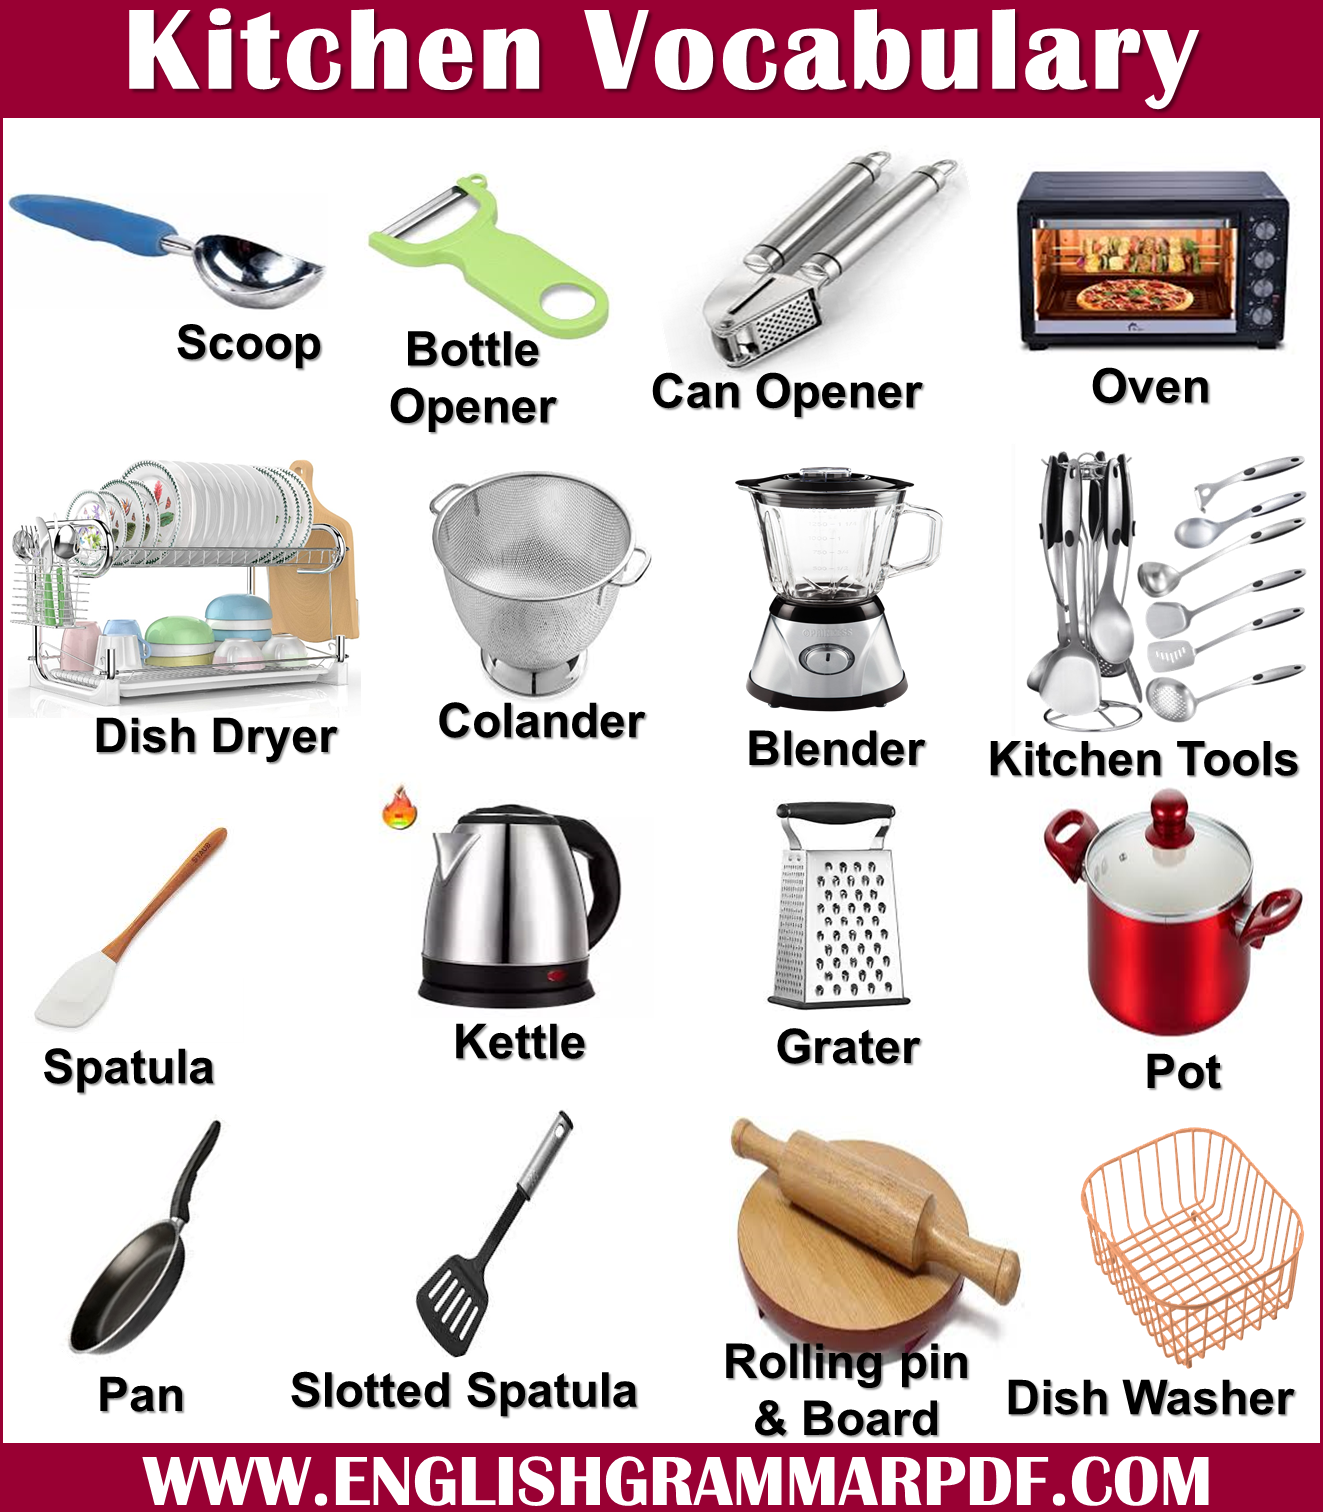 kitchen vocabulary words with pictures